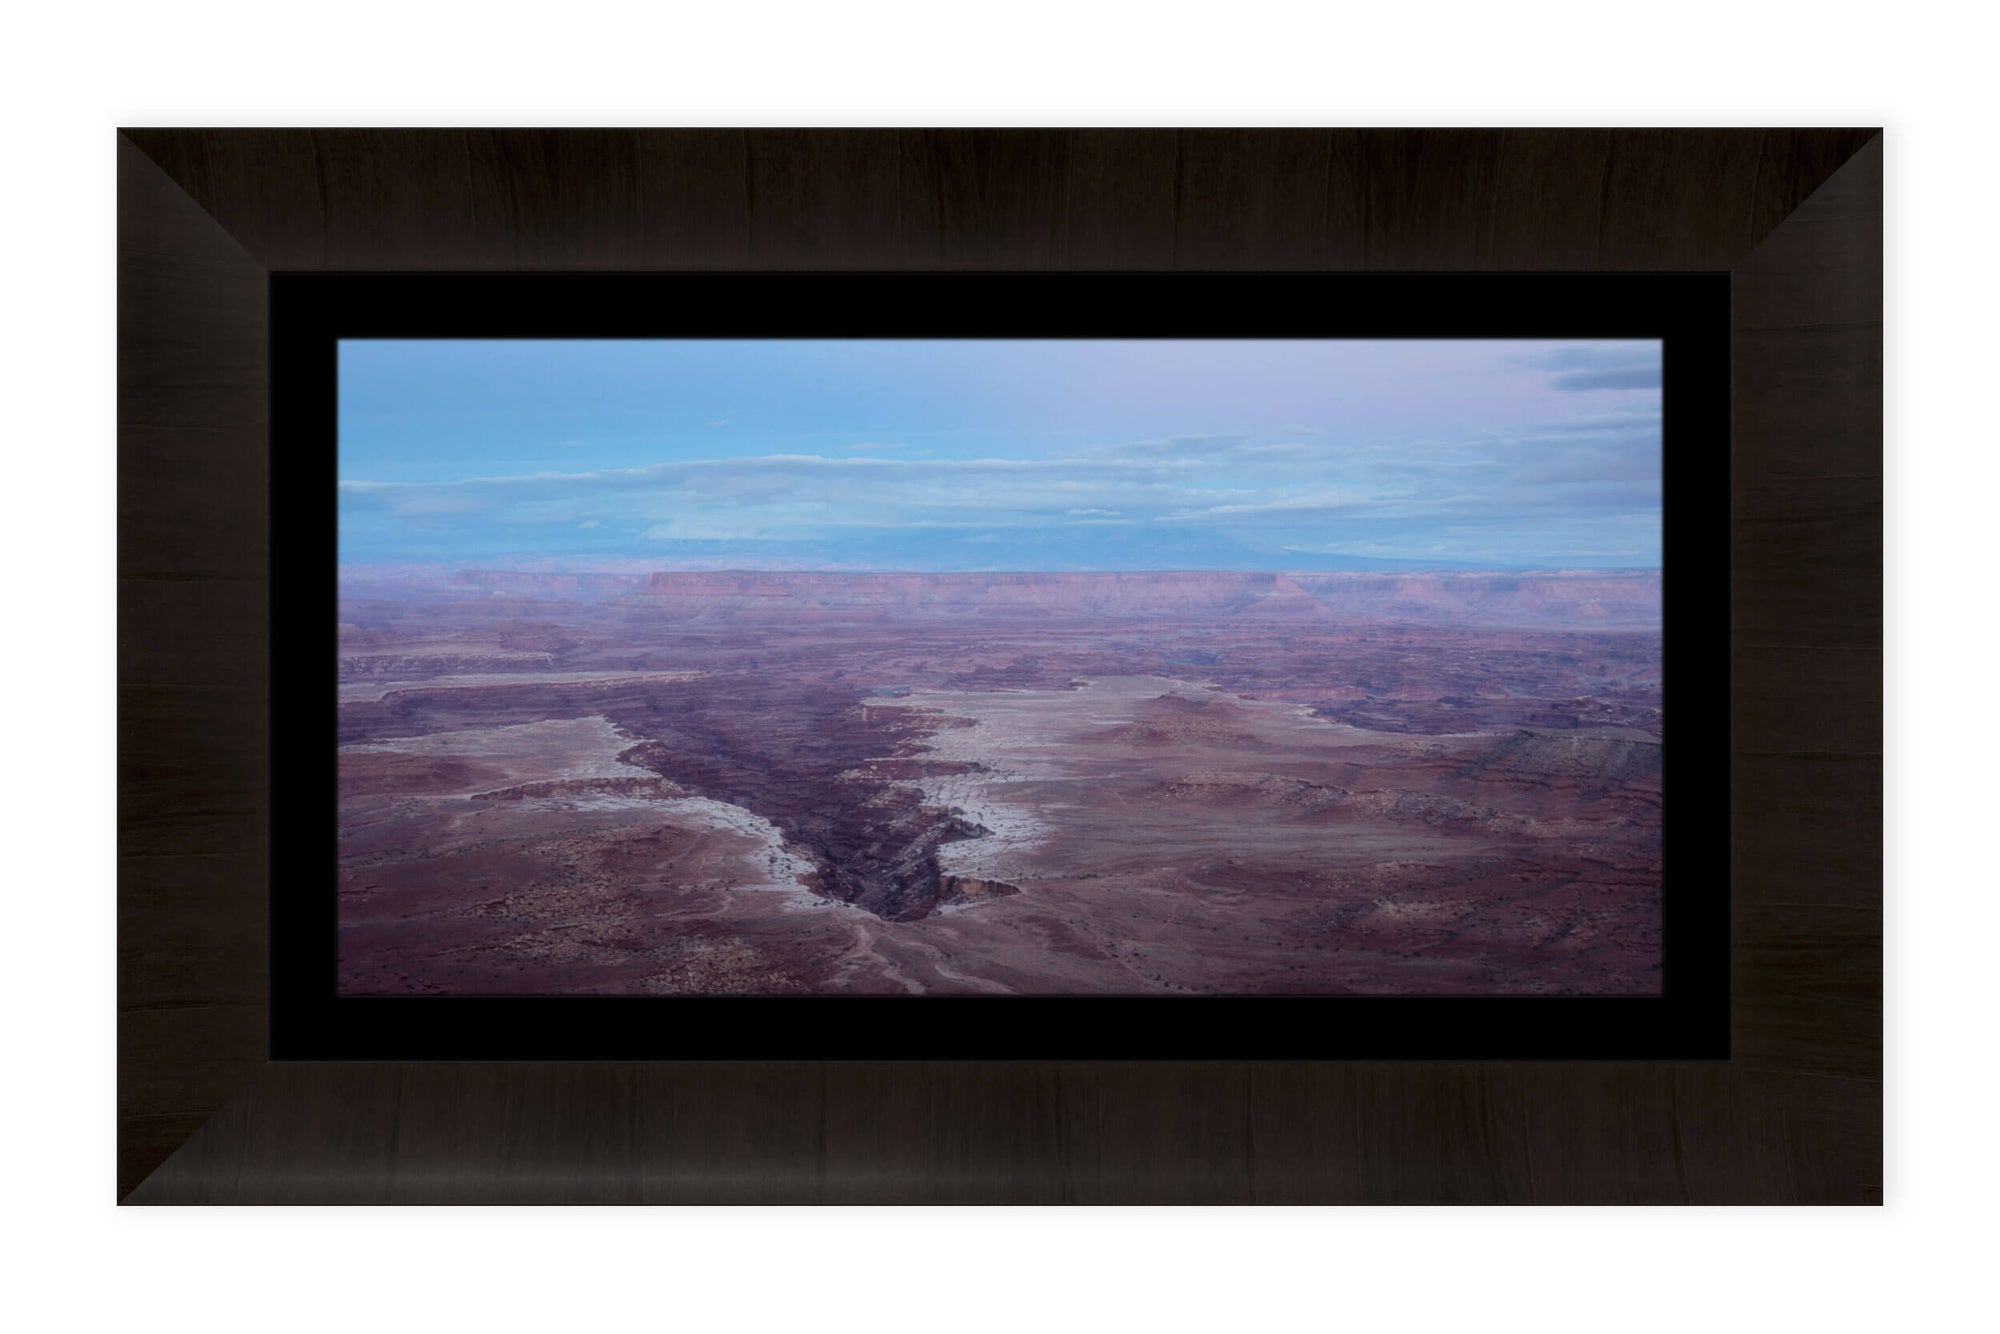 A piece of framed Moab art shows a Canyonlands National Park picture at sunset.